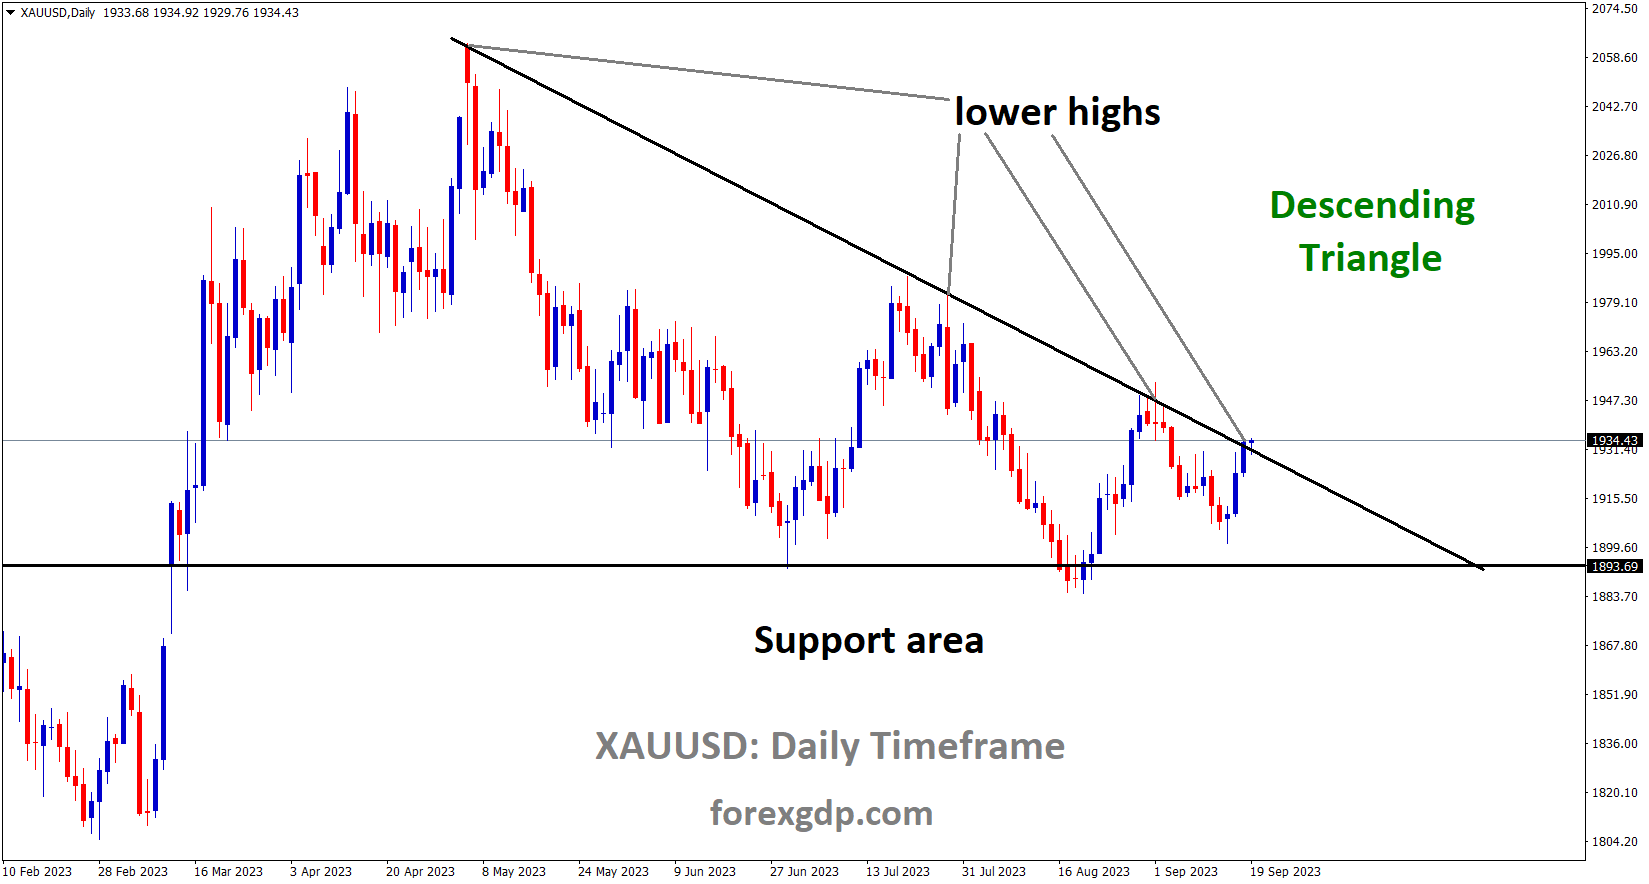 XAUUSD Gold price is moving in the Descending triangle pattern and the market has reached the lower high area of the pattern